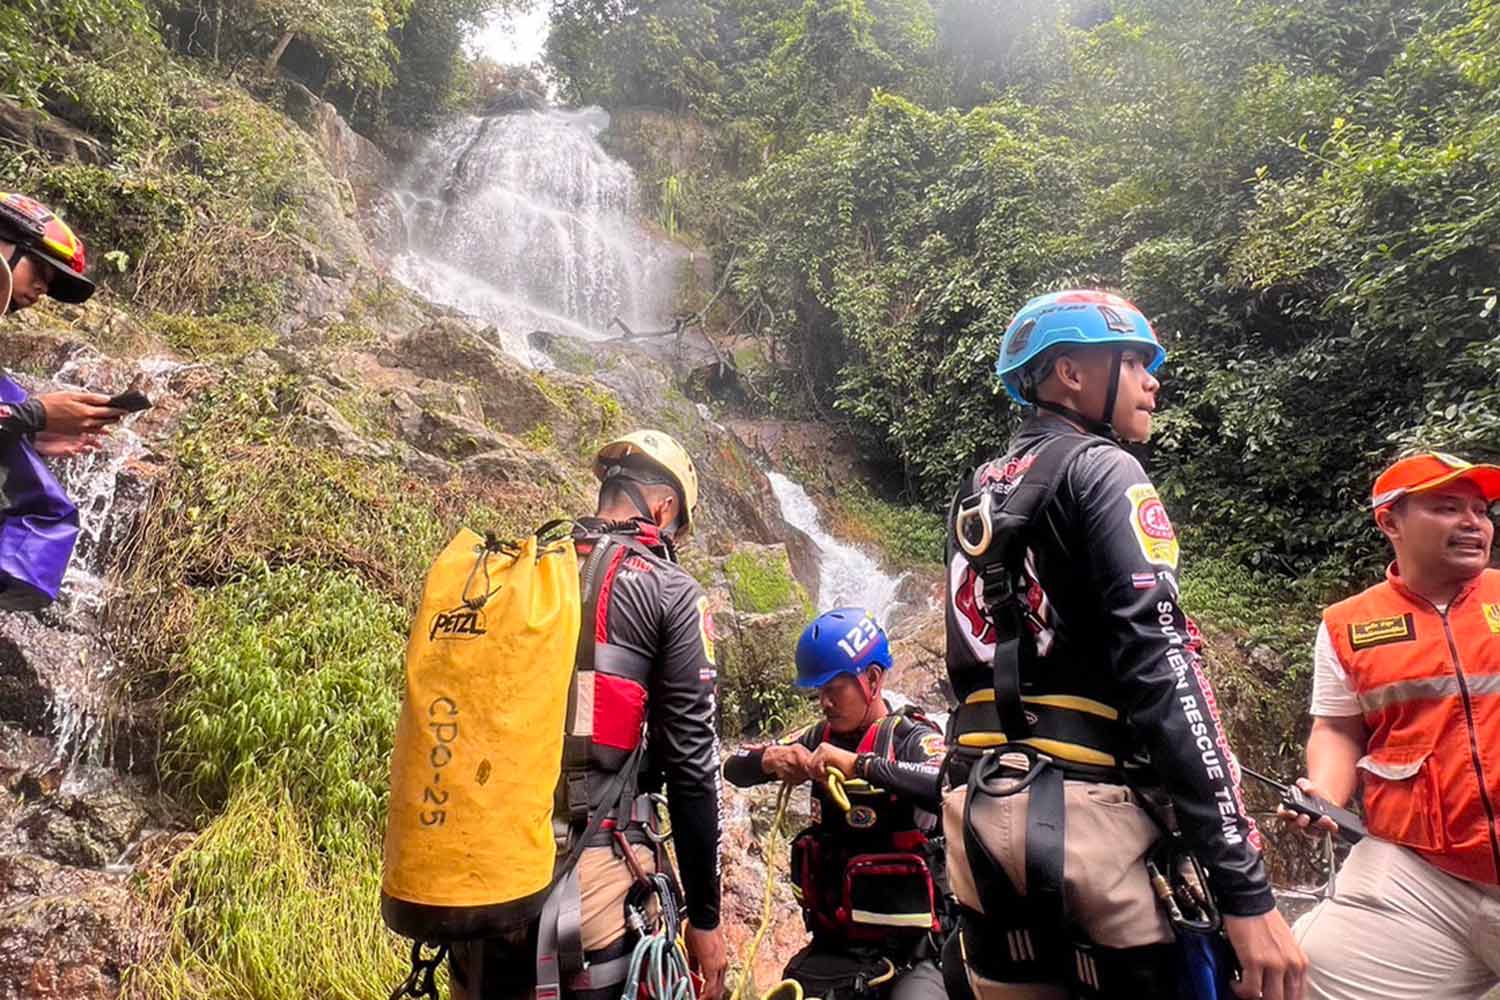 Frenchman, 20 Falls to his Death in Koh Samui, Thailand